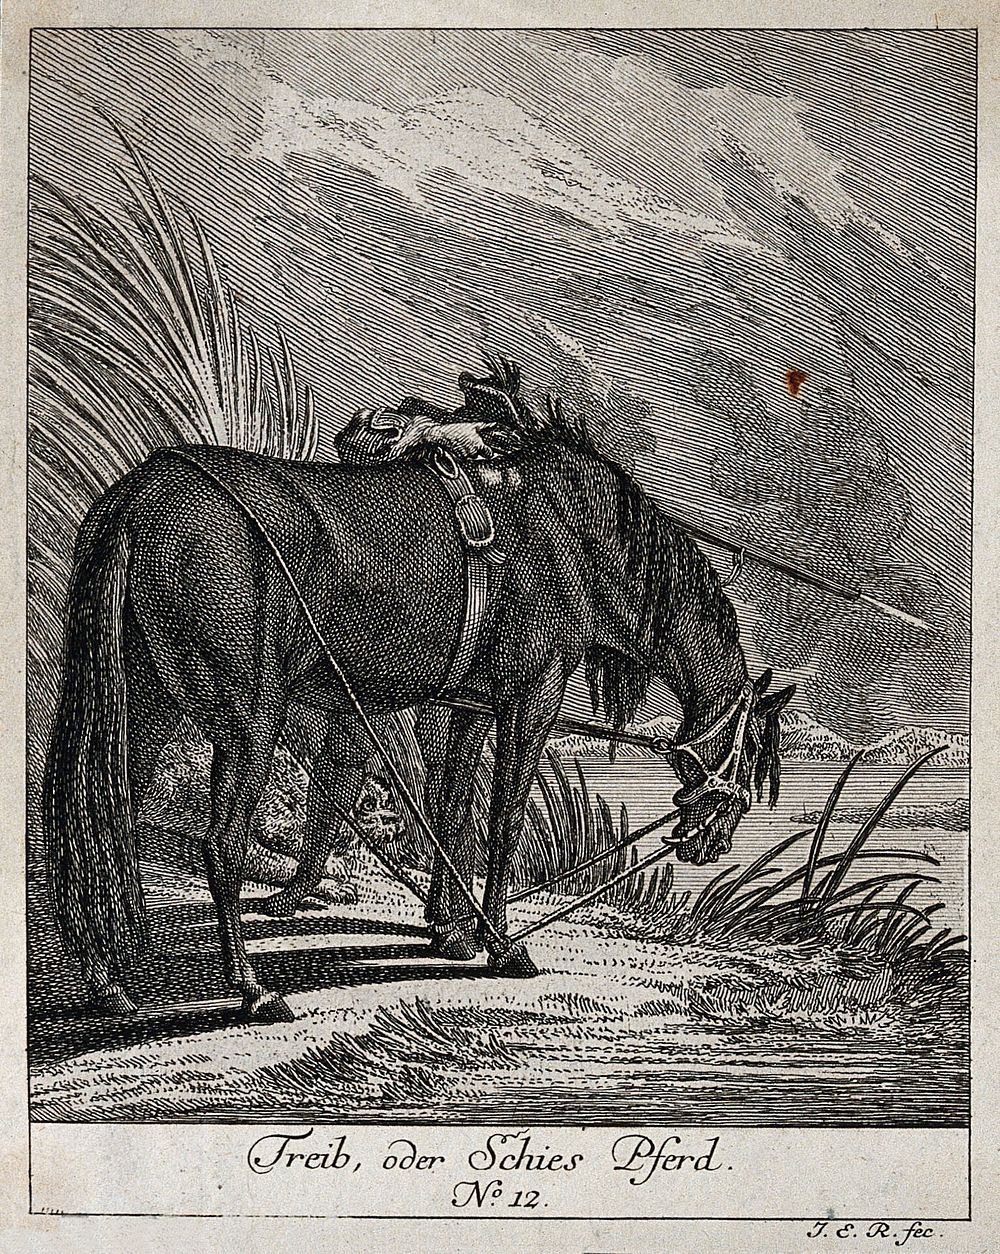 A shooting-horse is standing with its head tied to its hoofs and body near a lake while the huntsman hidden behind the horse…